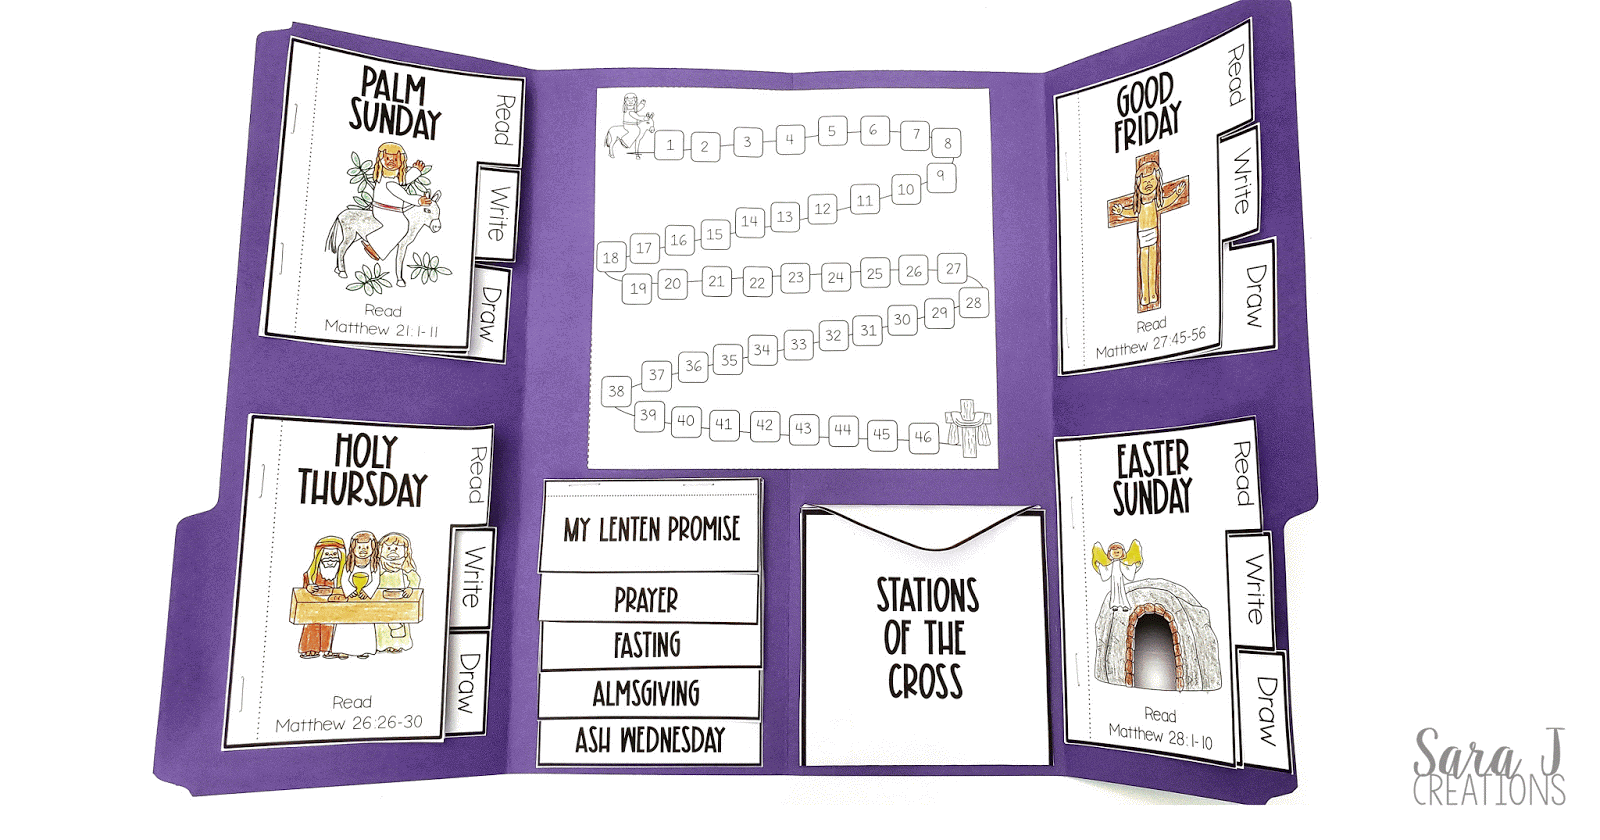 Use this Catholic Lent lapbook to help your students grow closer to Jesus through scripture and Catholic traditions & devotions.